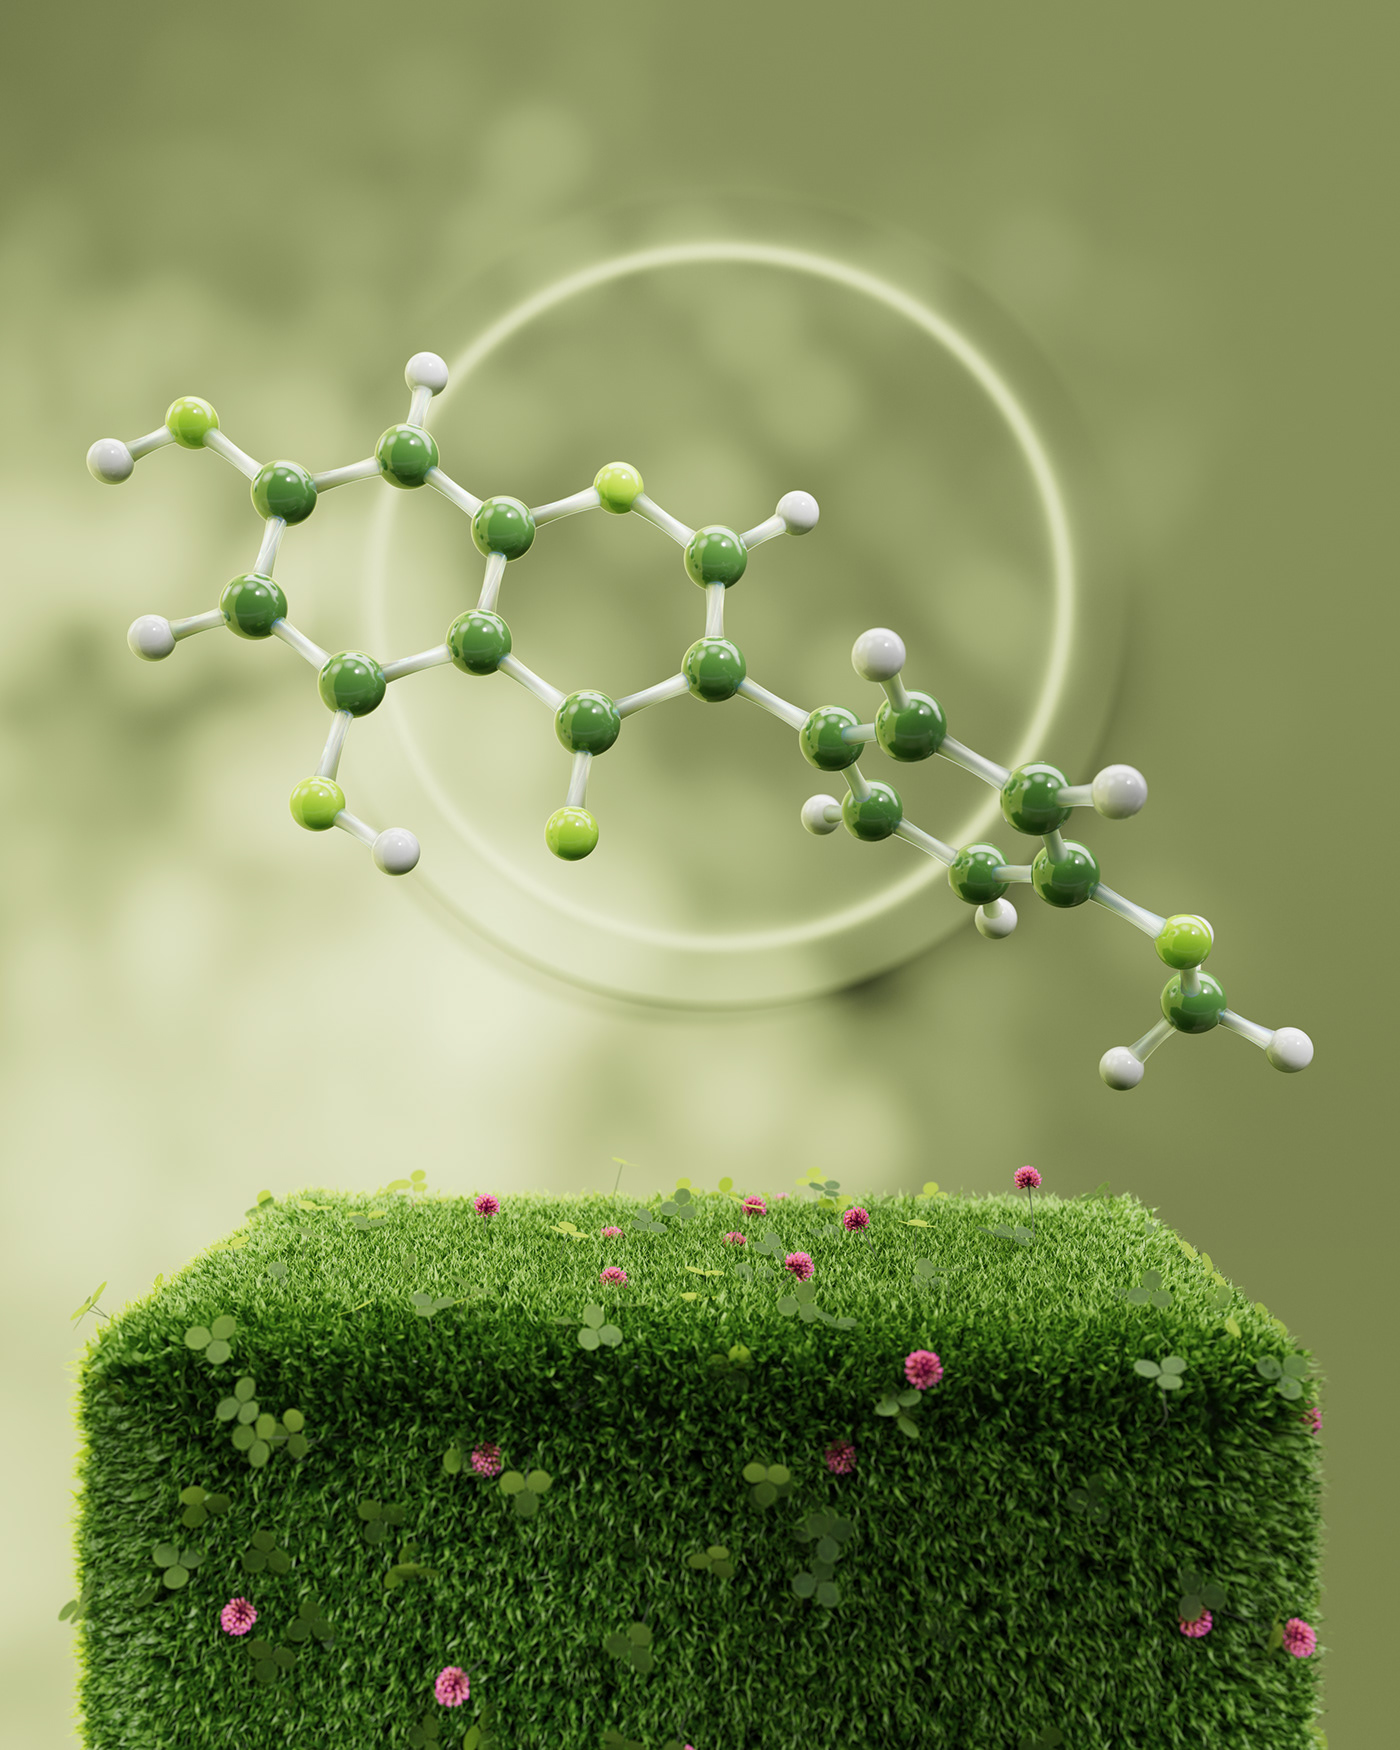 3D biology chemistry clover grass green Medical Animation molecule Pharmaceutical science